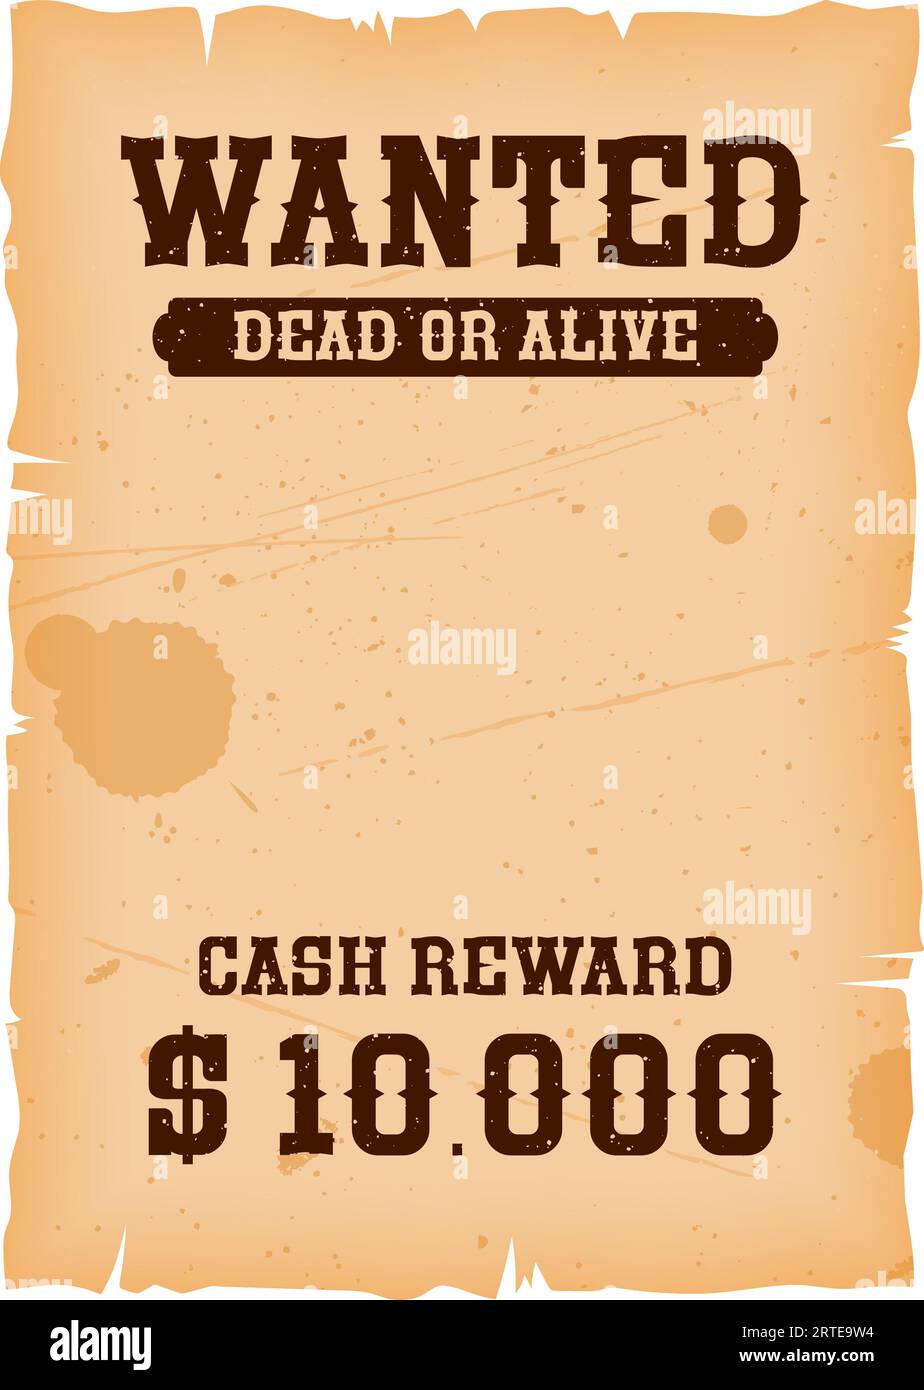 Western wanted banner, vector dead or alive wanted poster with reward. Old Wild West sheriff office or salon signboard on vintage torn paper or parchment scroll with criminal notice and reward offer Stock Vector